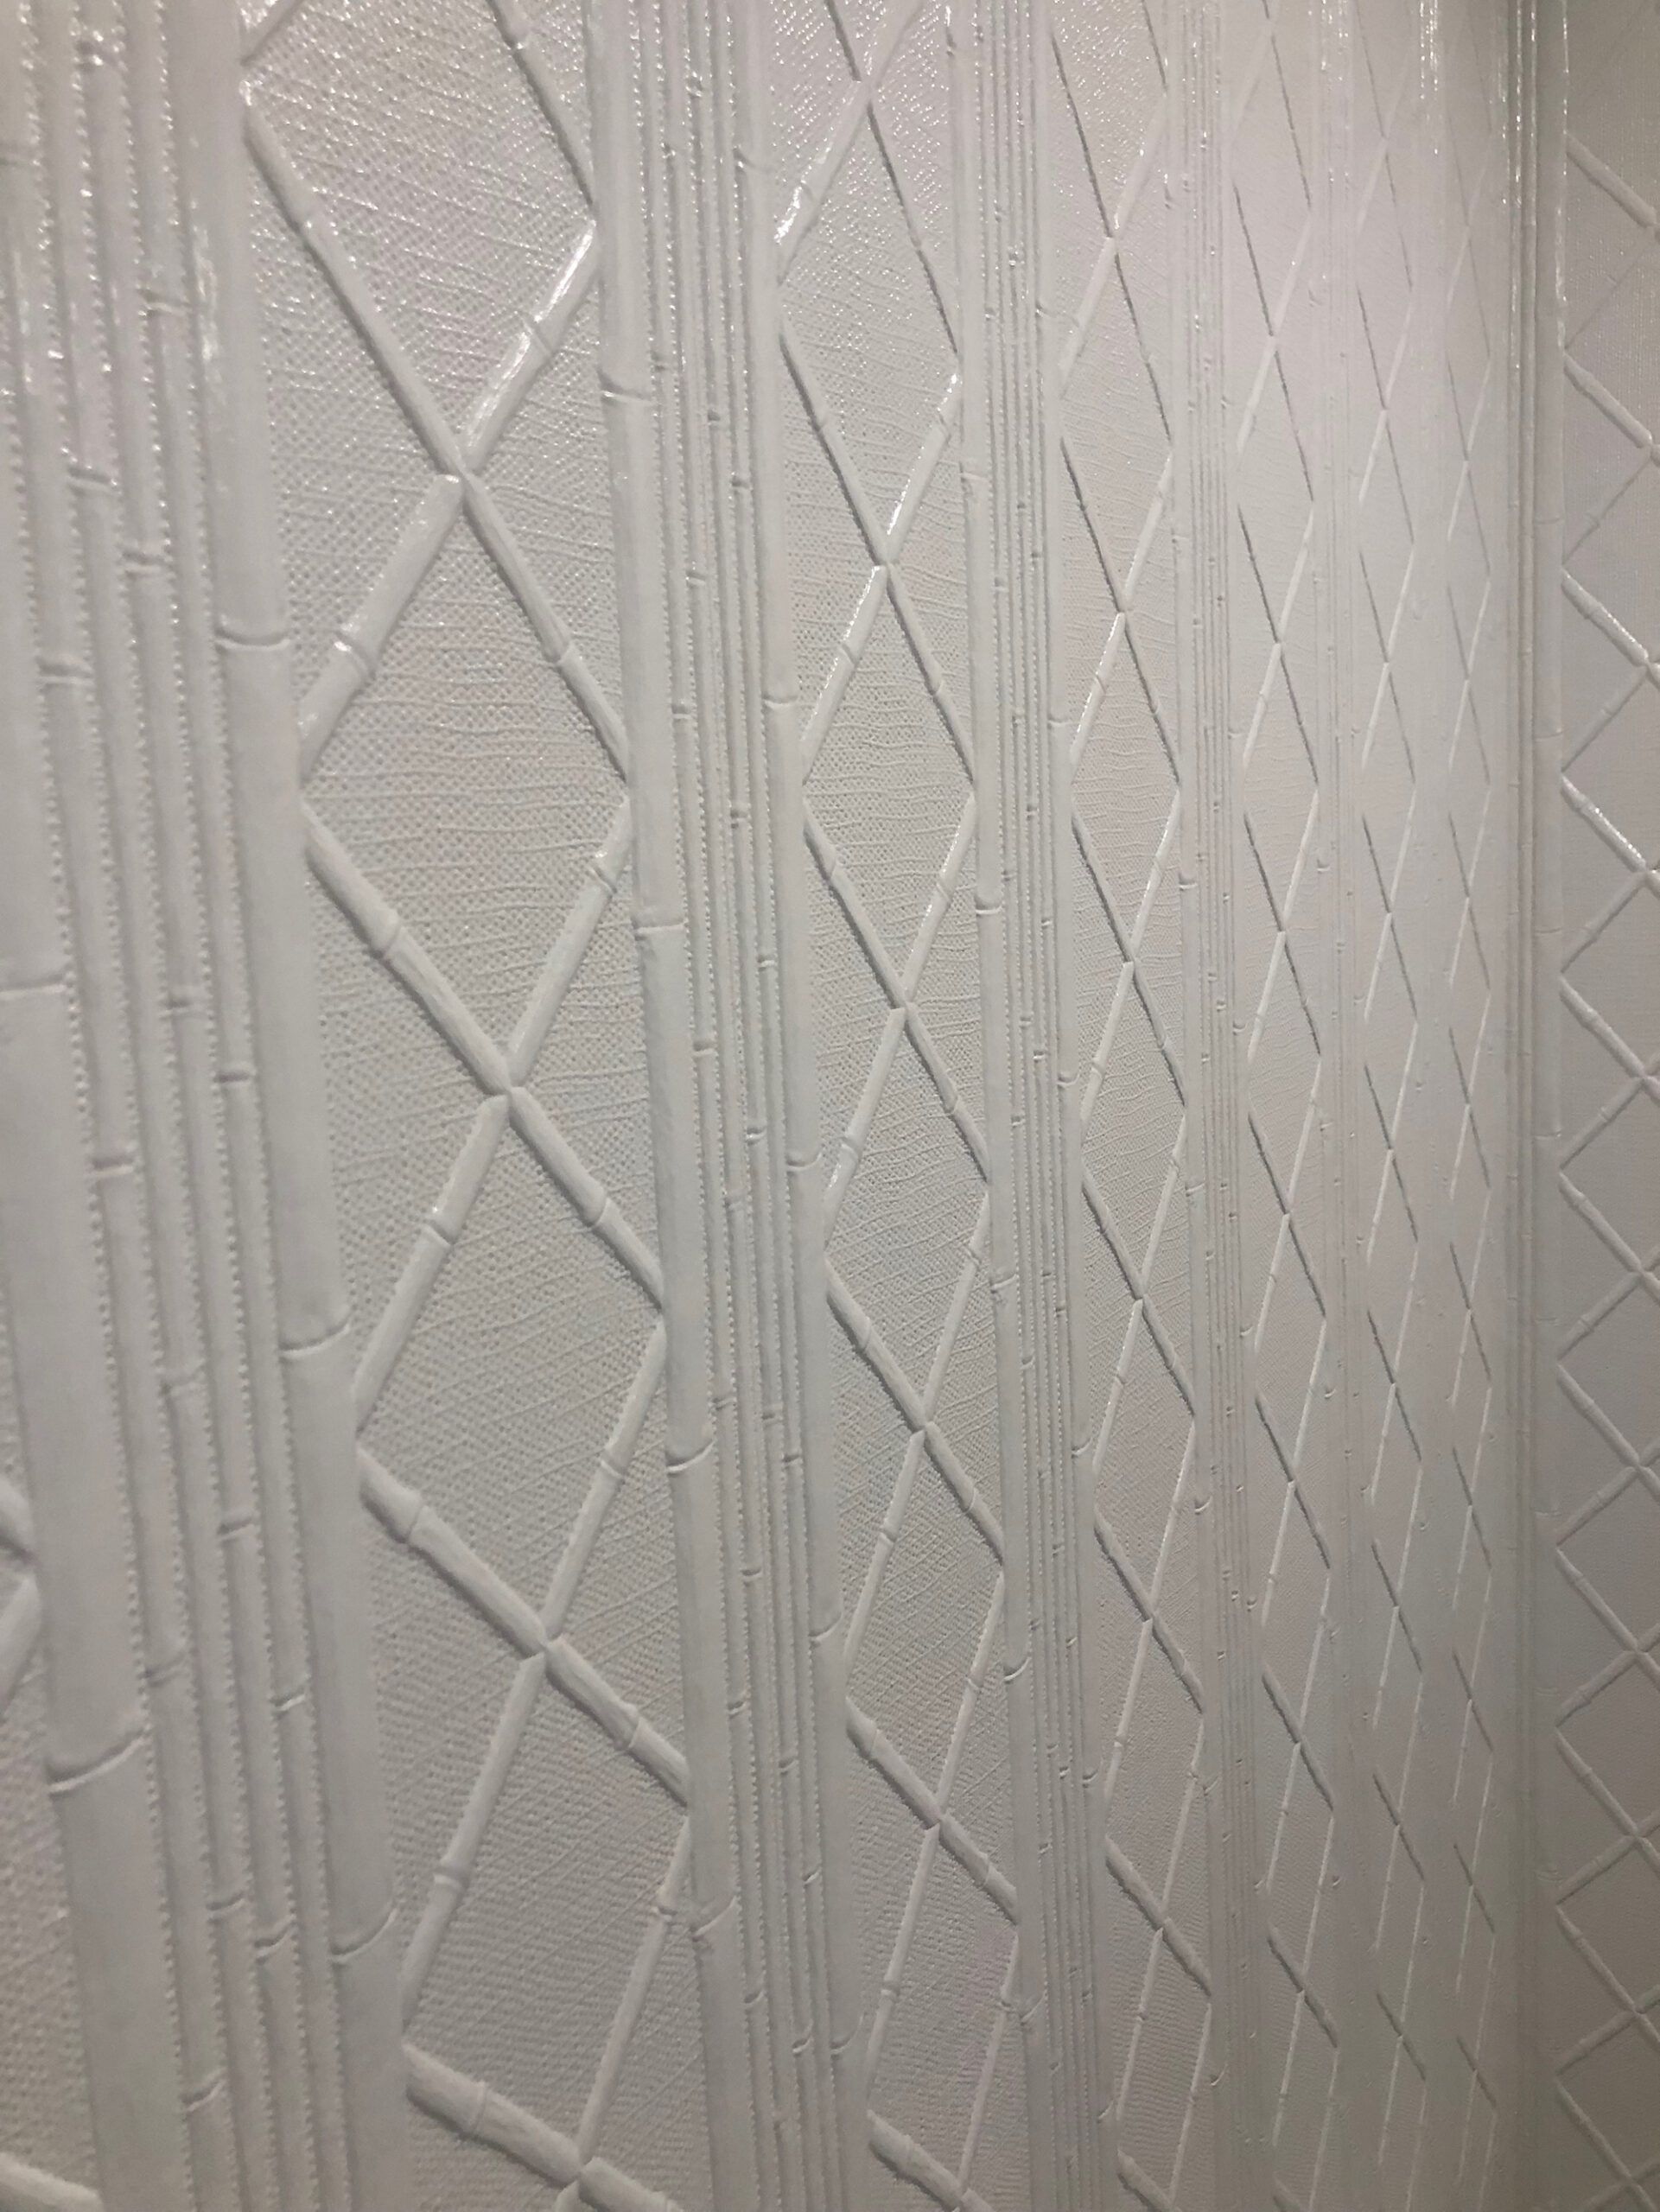 Textured wall painting in Southwest Florida